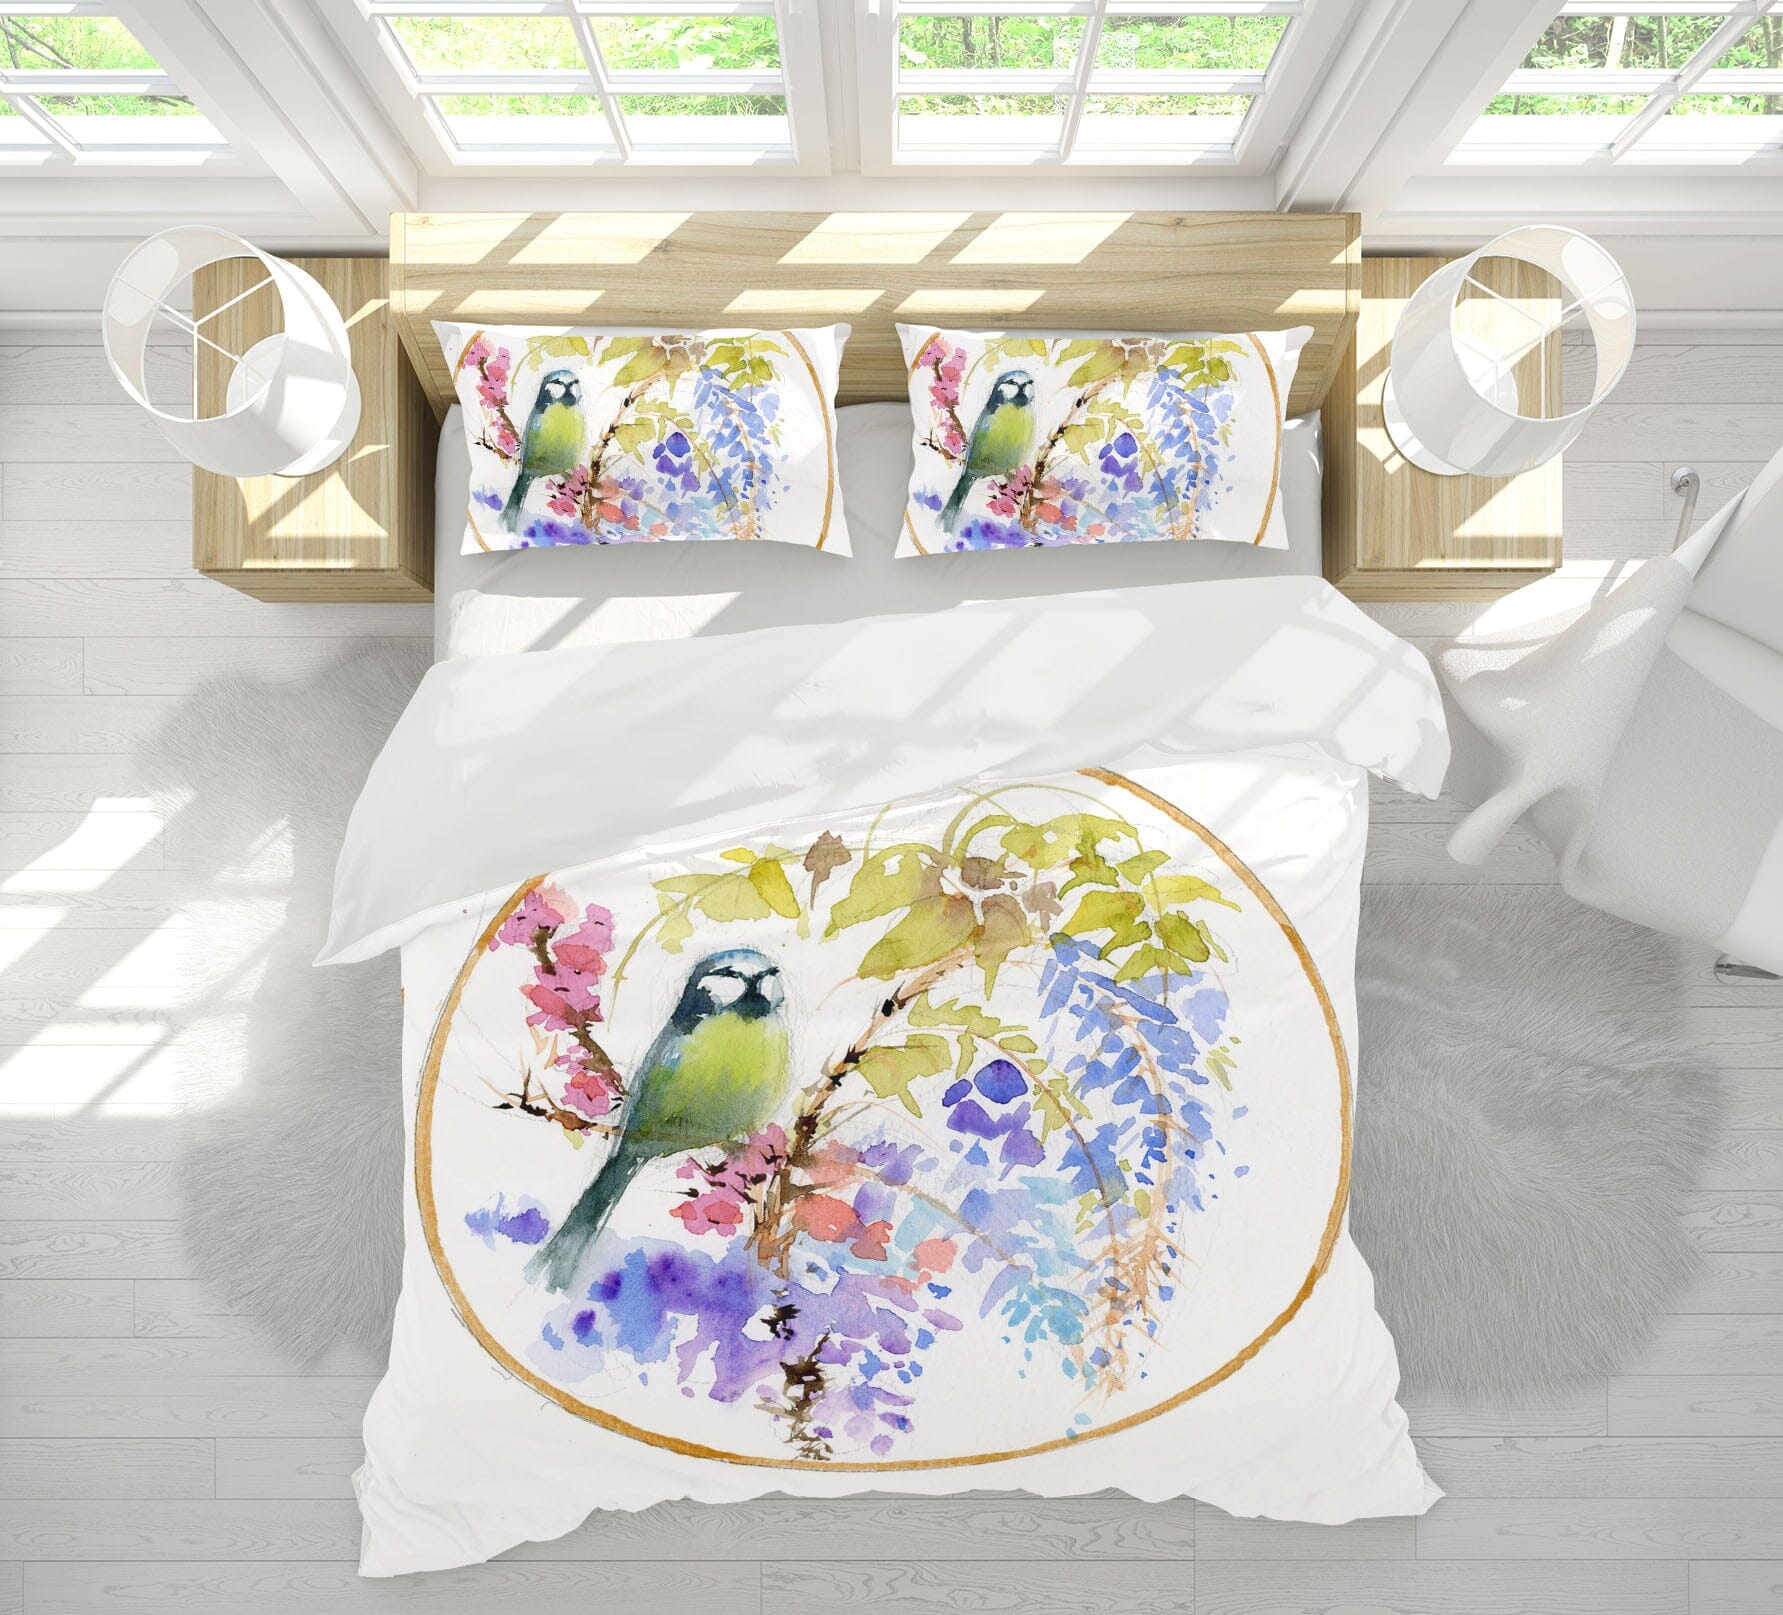 3D Embroidered Bird 2001 Anne Farrall Doyle Bedding Bed Pillowcases Quilt Quiet Covers AJ Creativity Home 